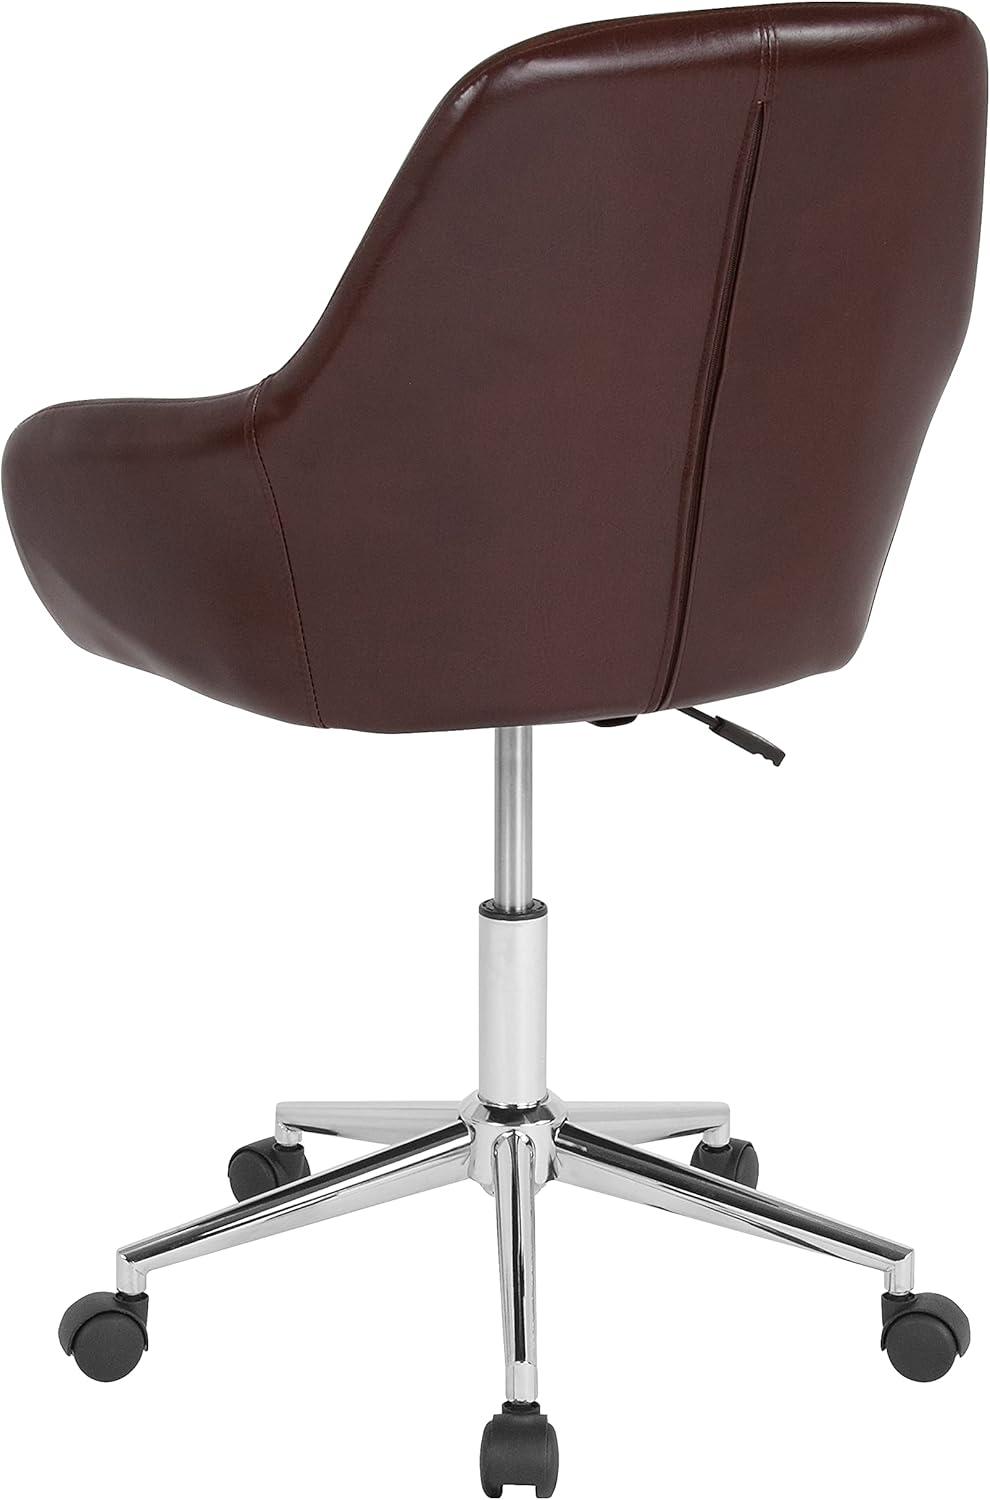 Cortana Mid-Back Brown LeatherSoft Swivel Task Chair with Chrome Base